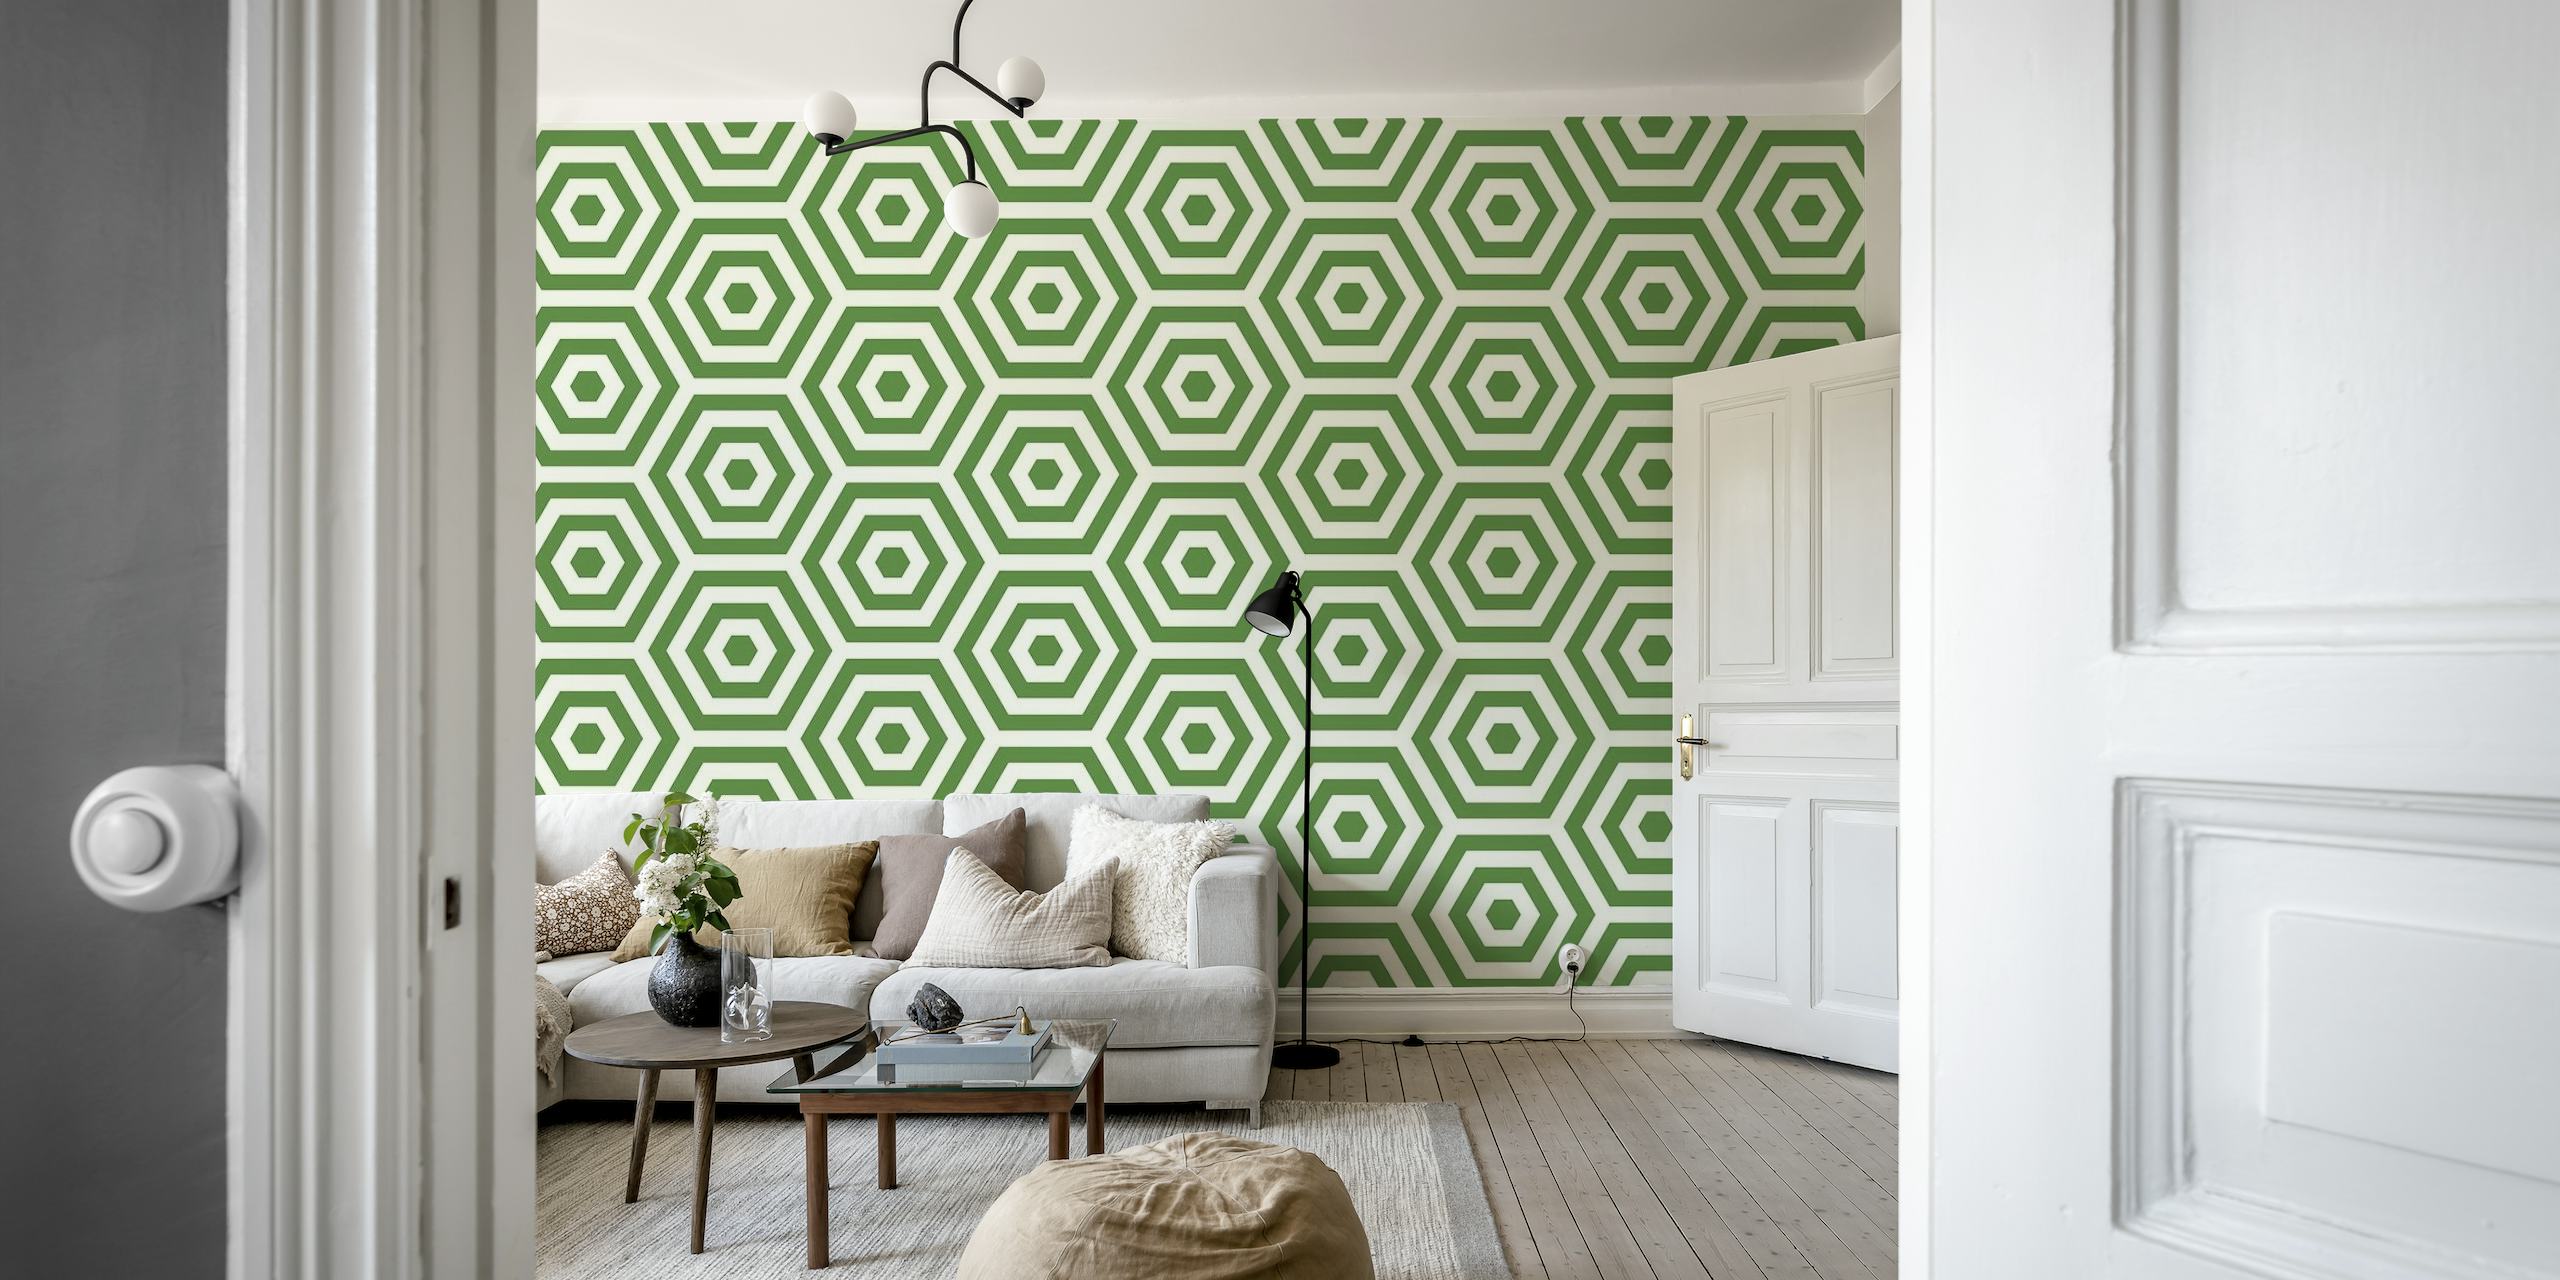 Green Beehive patterned wall mural with hexagonal shapes